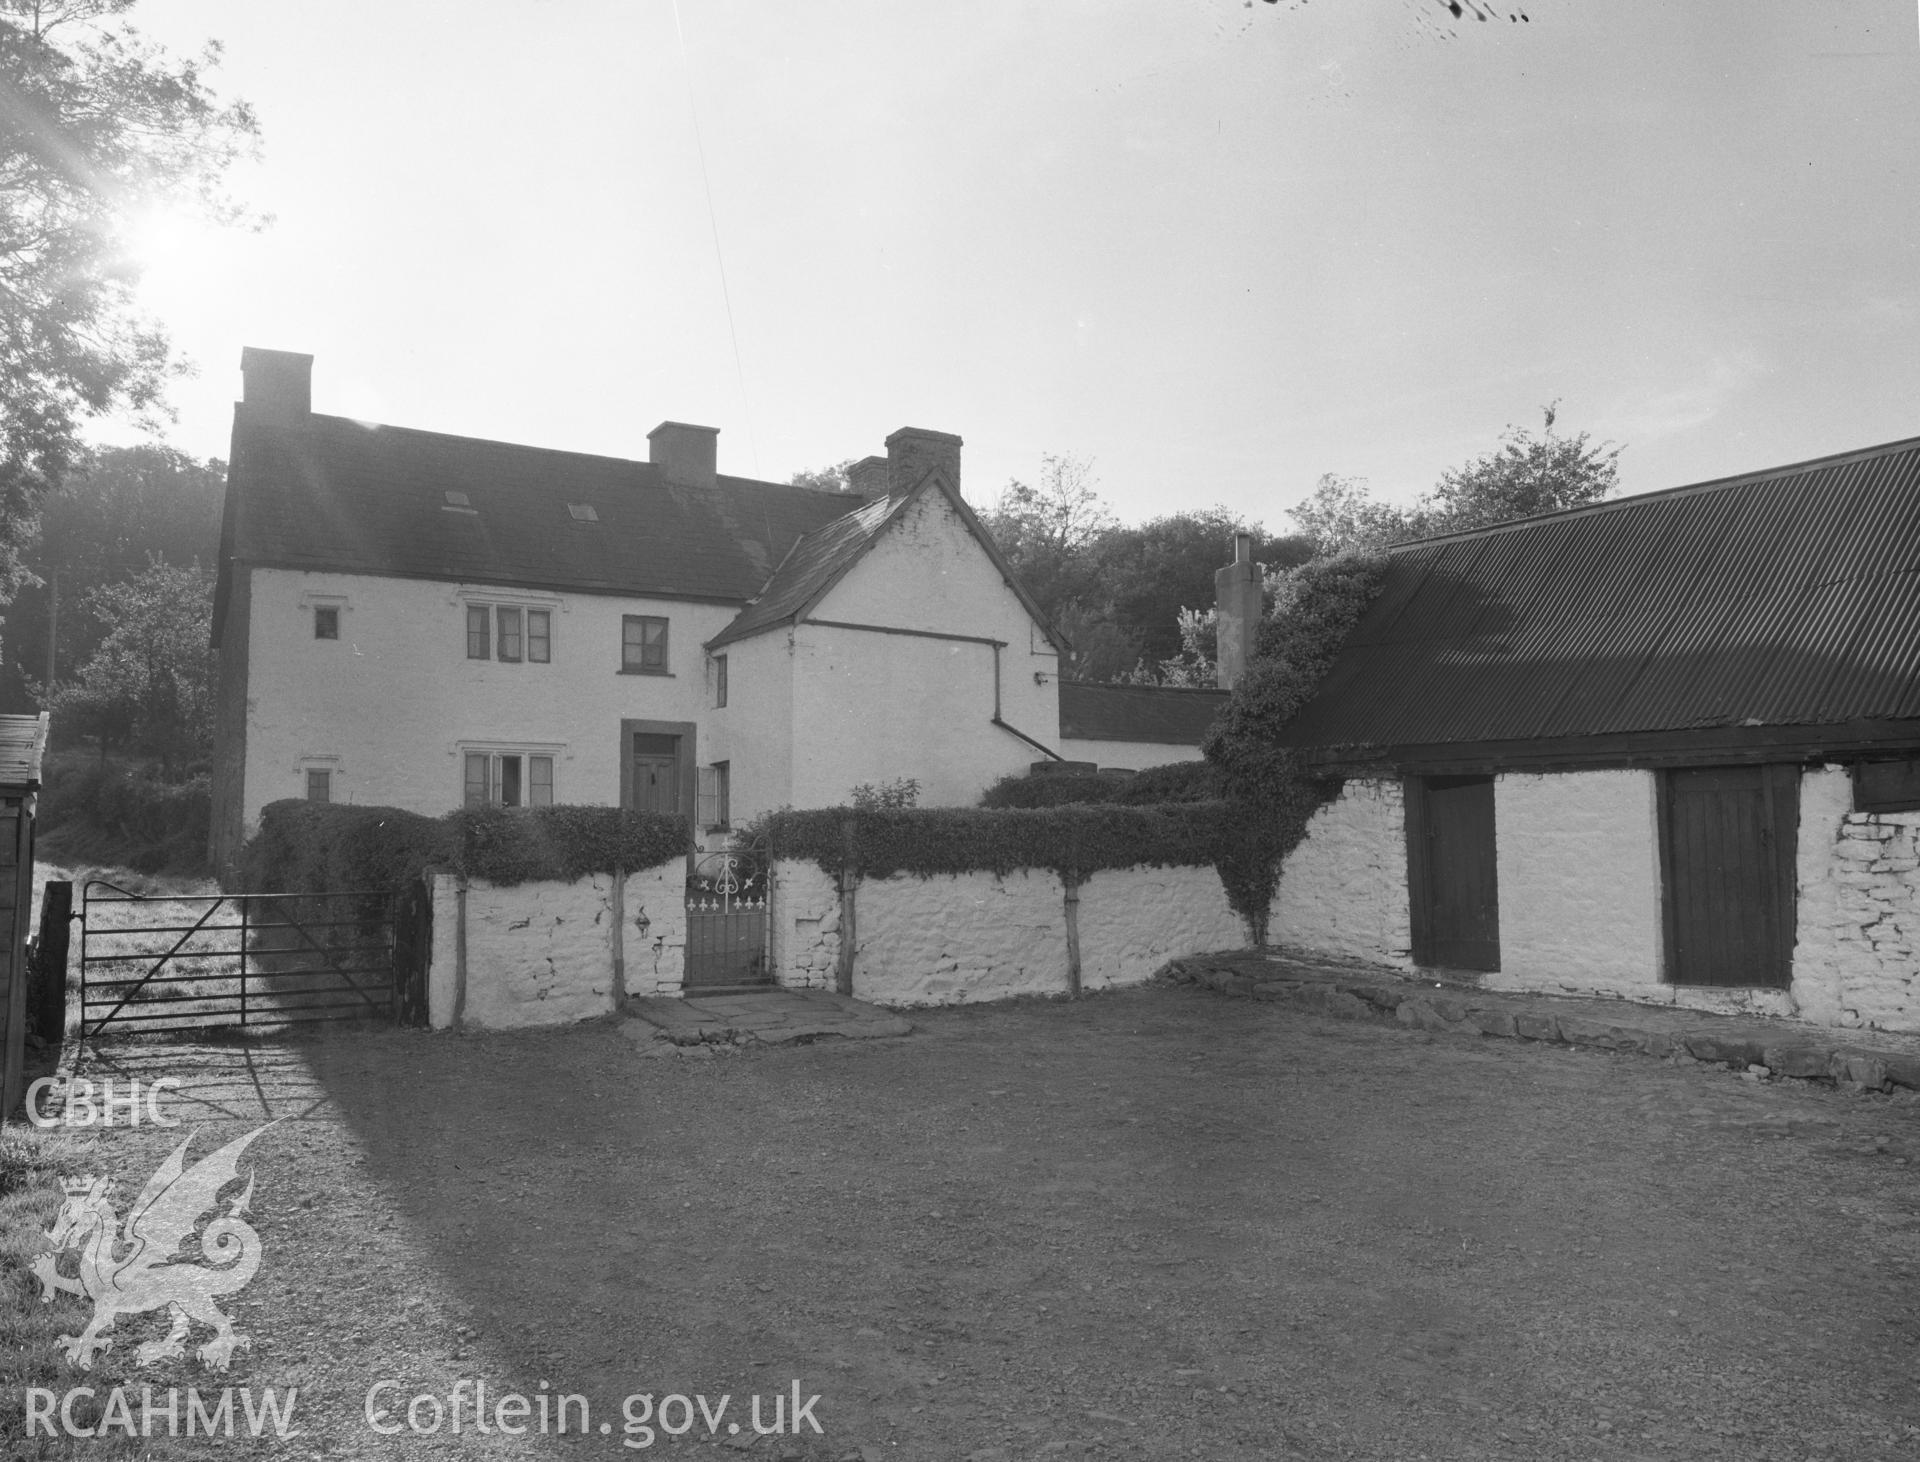 Black and white acetate negative showing exterior view of Cae'r Wigau Isaf.